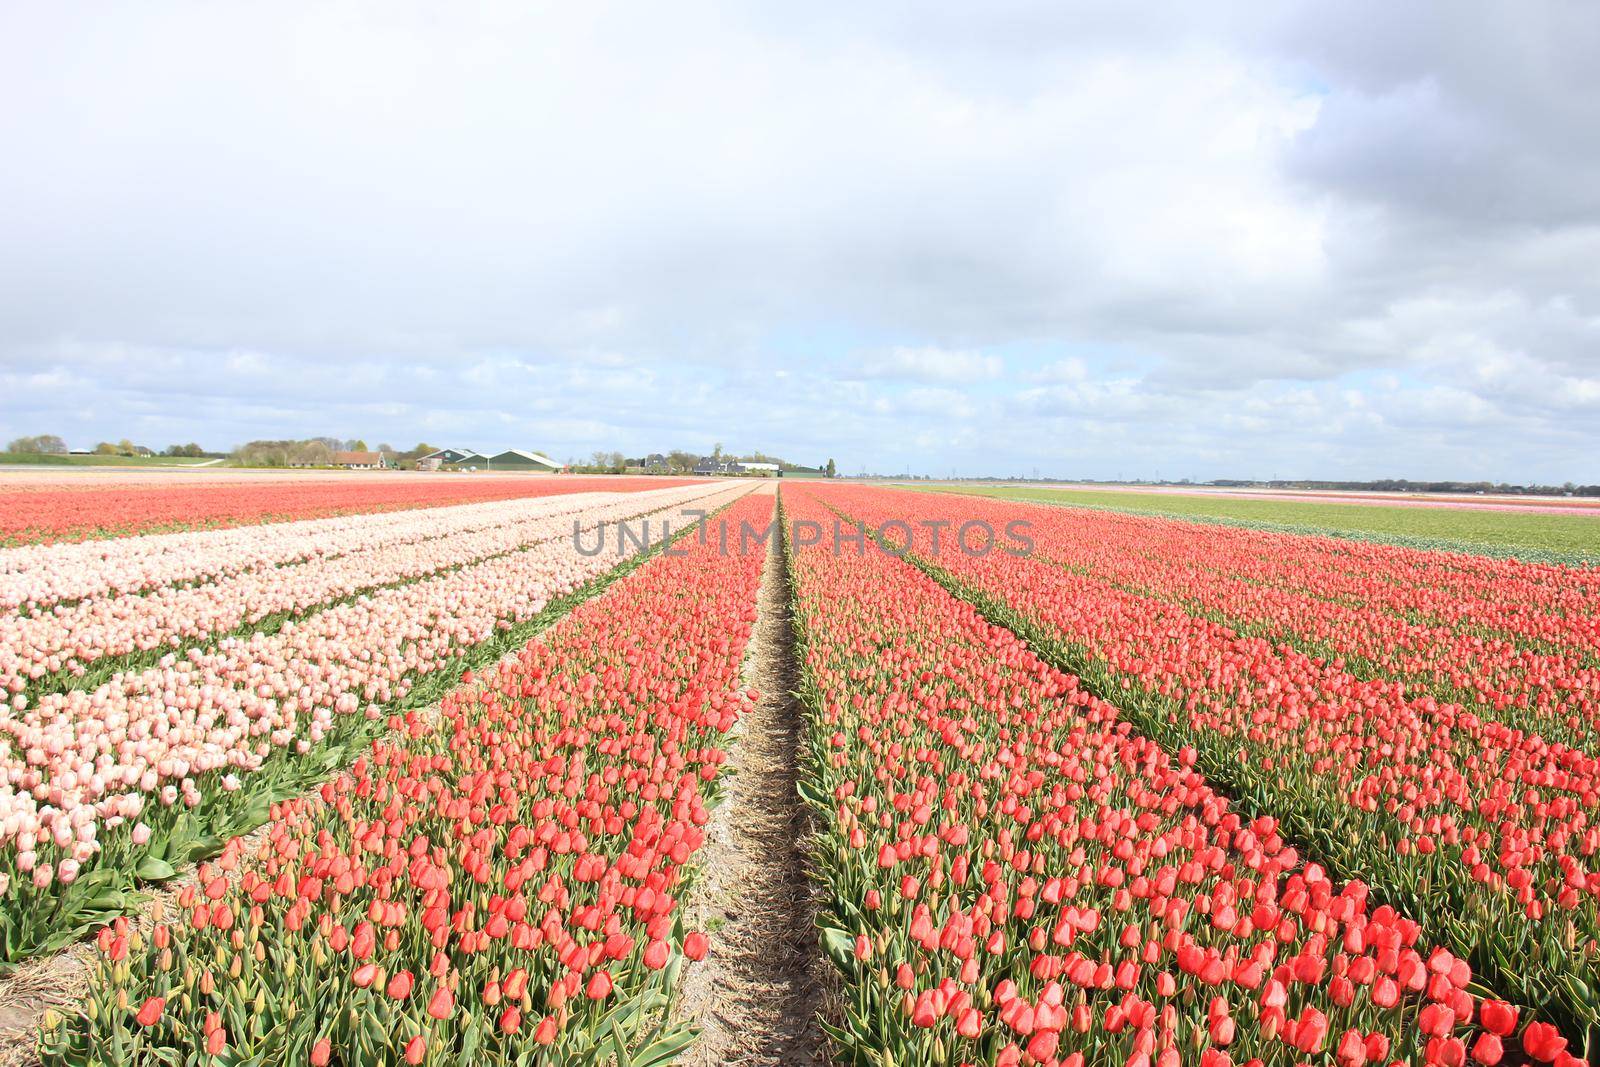 Tulips in a field: Tulips in various colors growing on a field, flower bulb industry by studioportosabbia